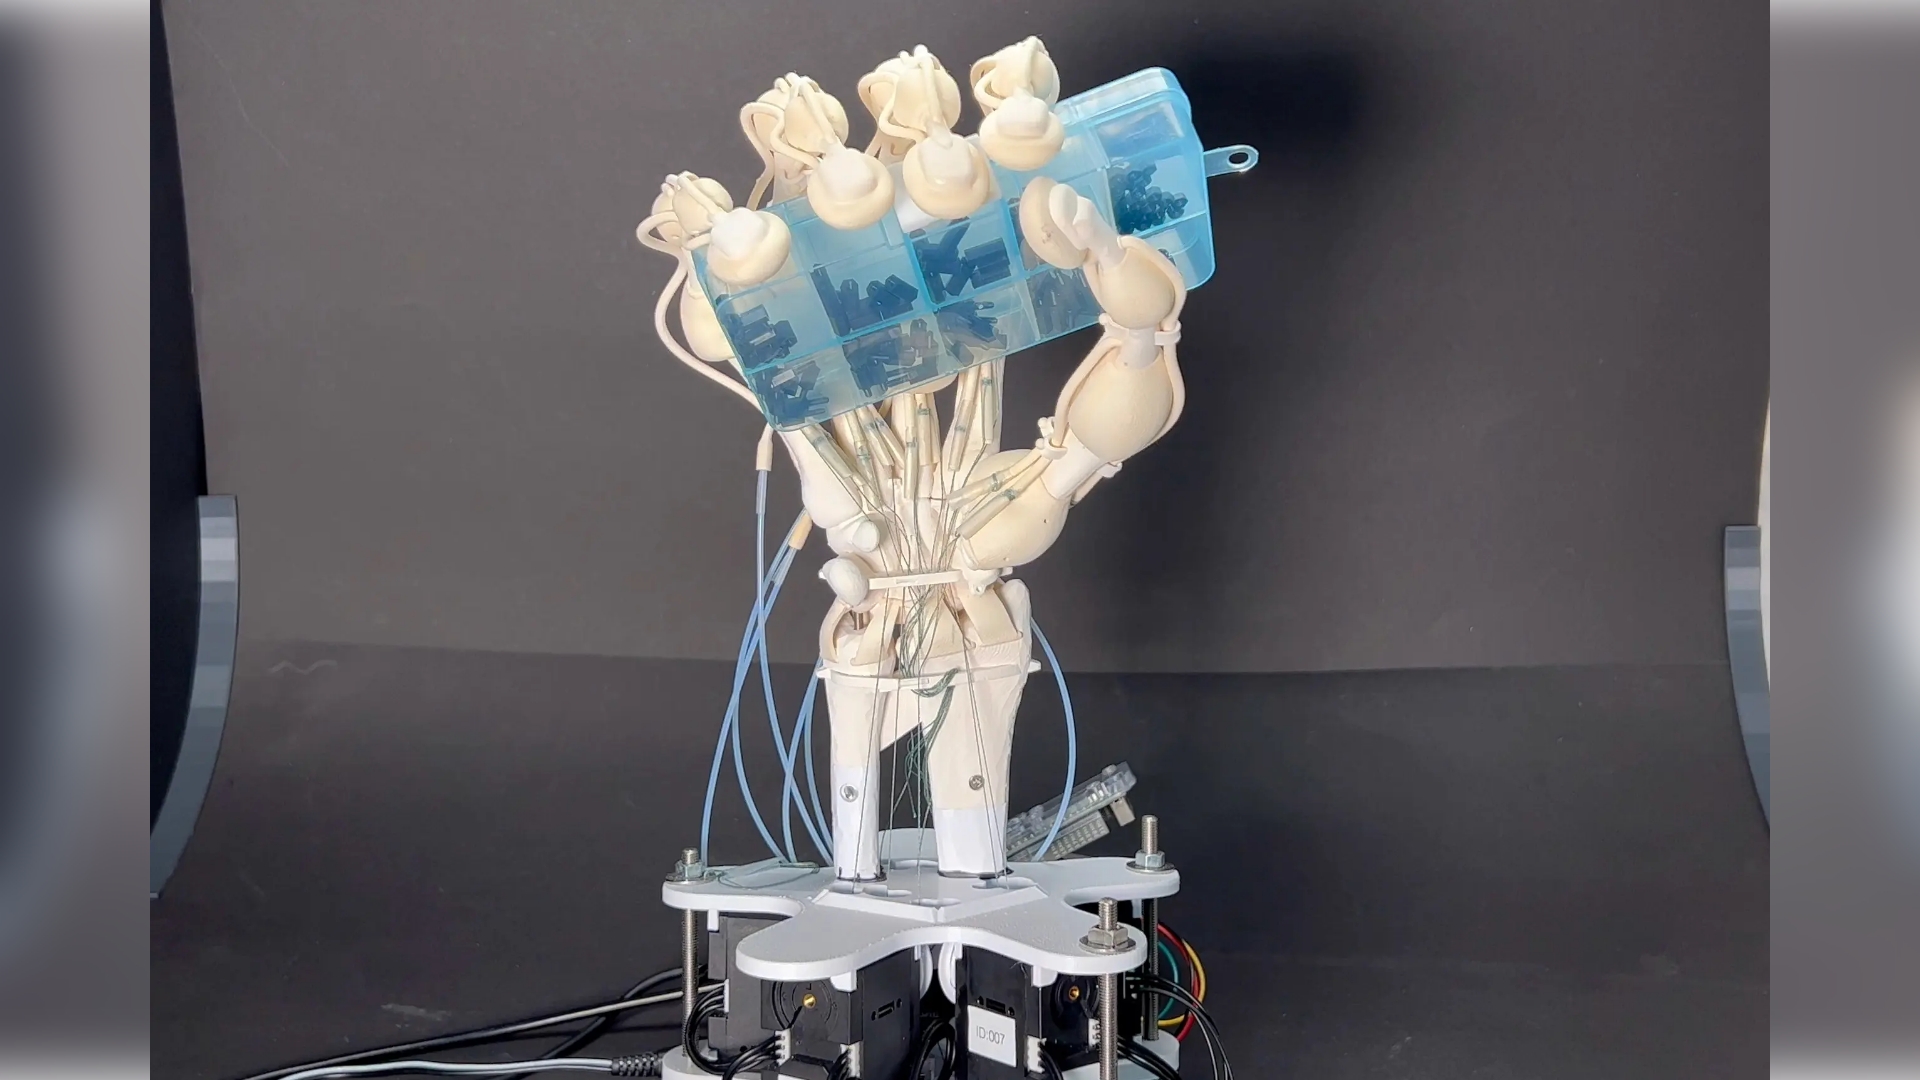 A robotic hand including bones, ligaments, and tendons was created by scientists using 3D printing.